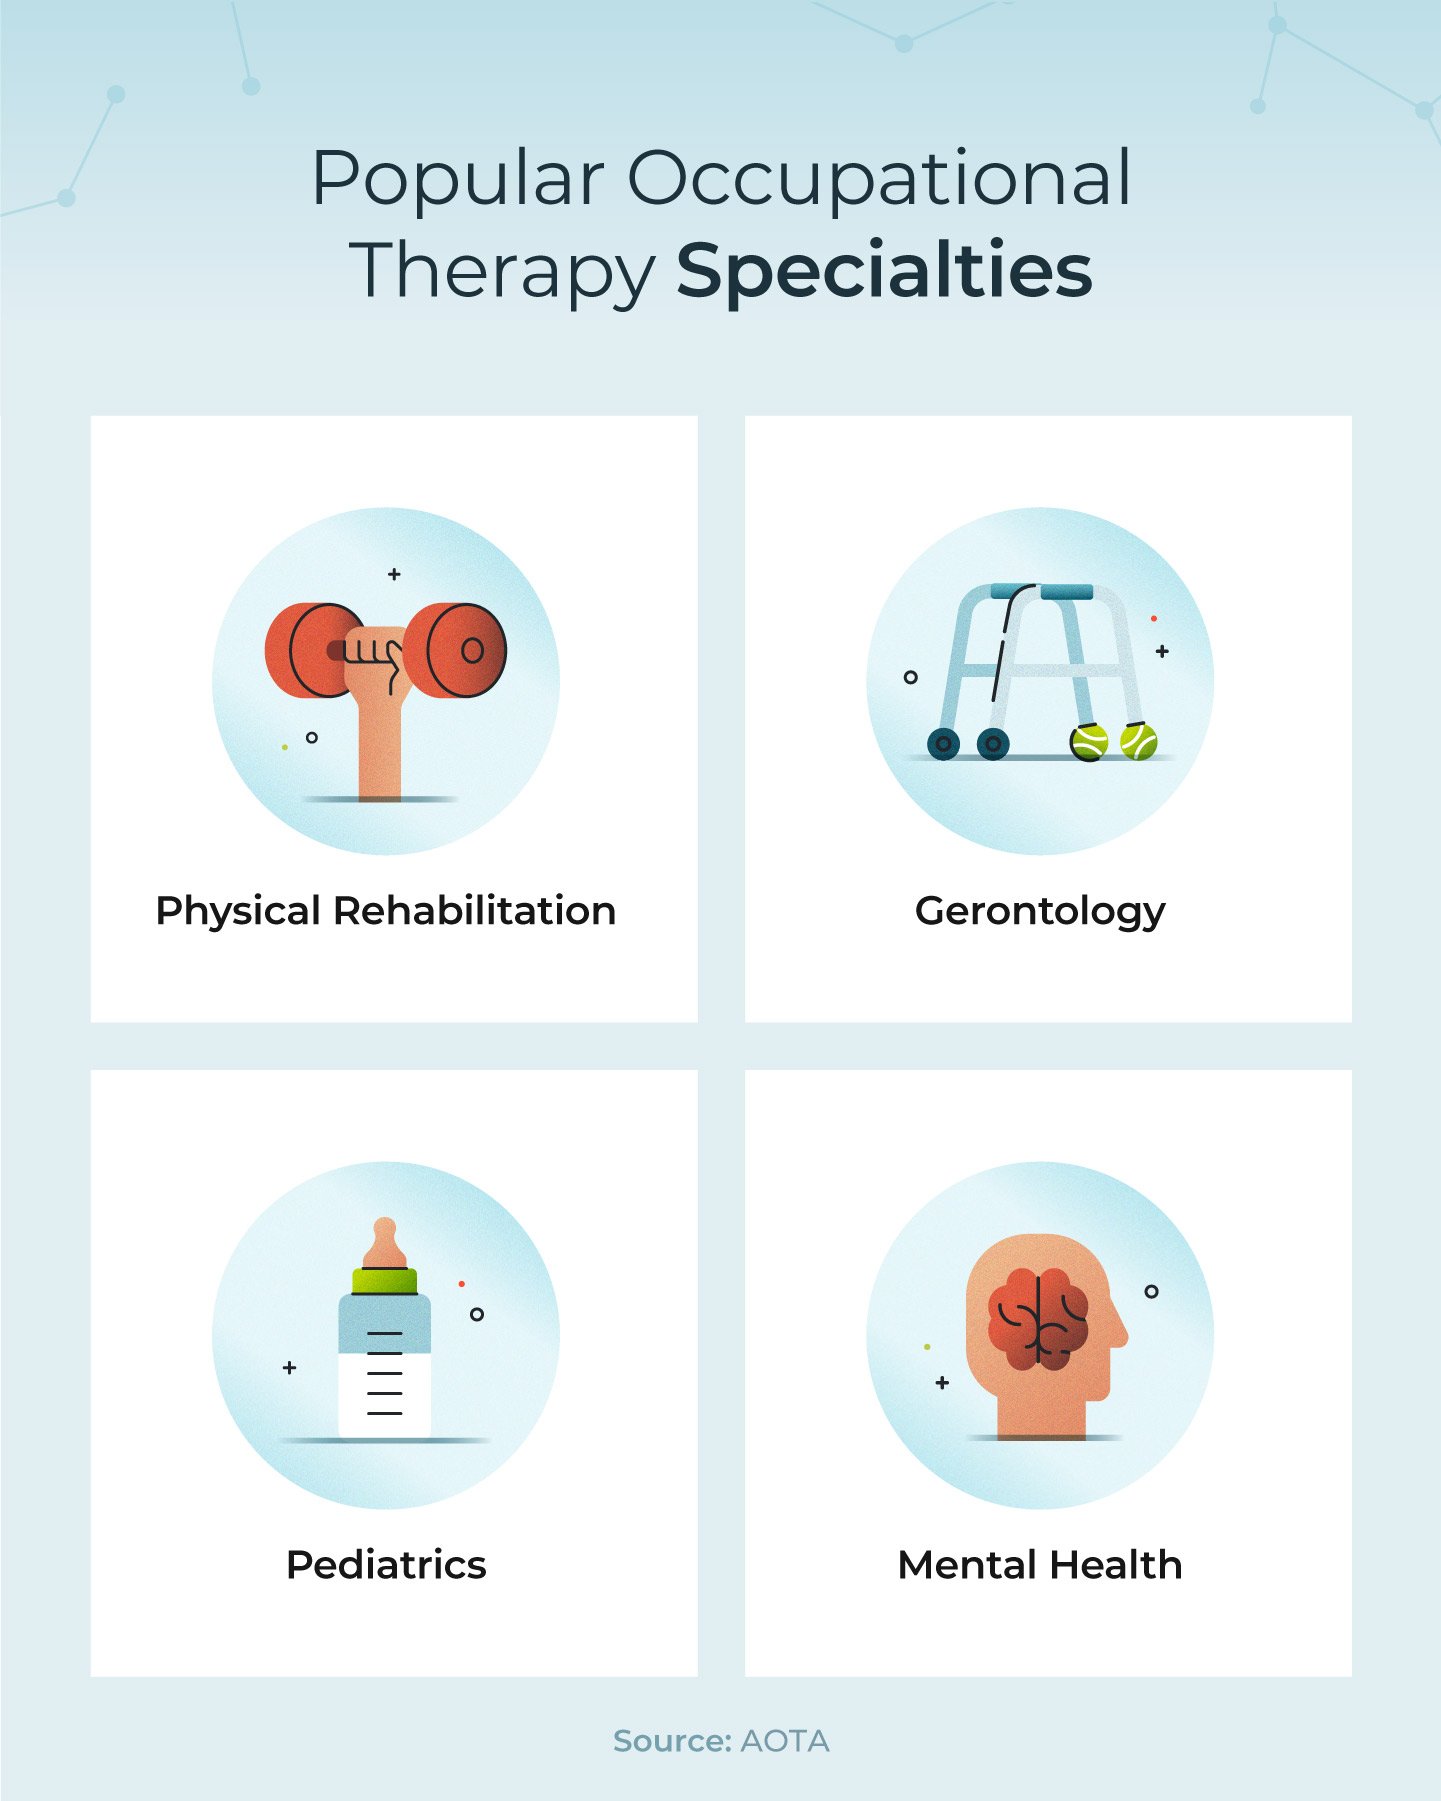 Popular occupational therapy specialties.